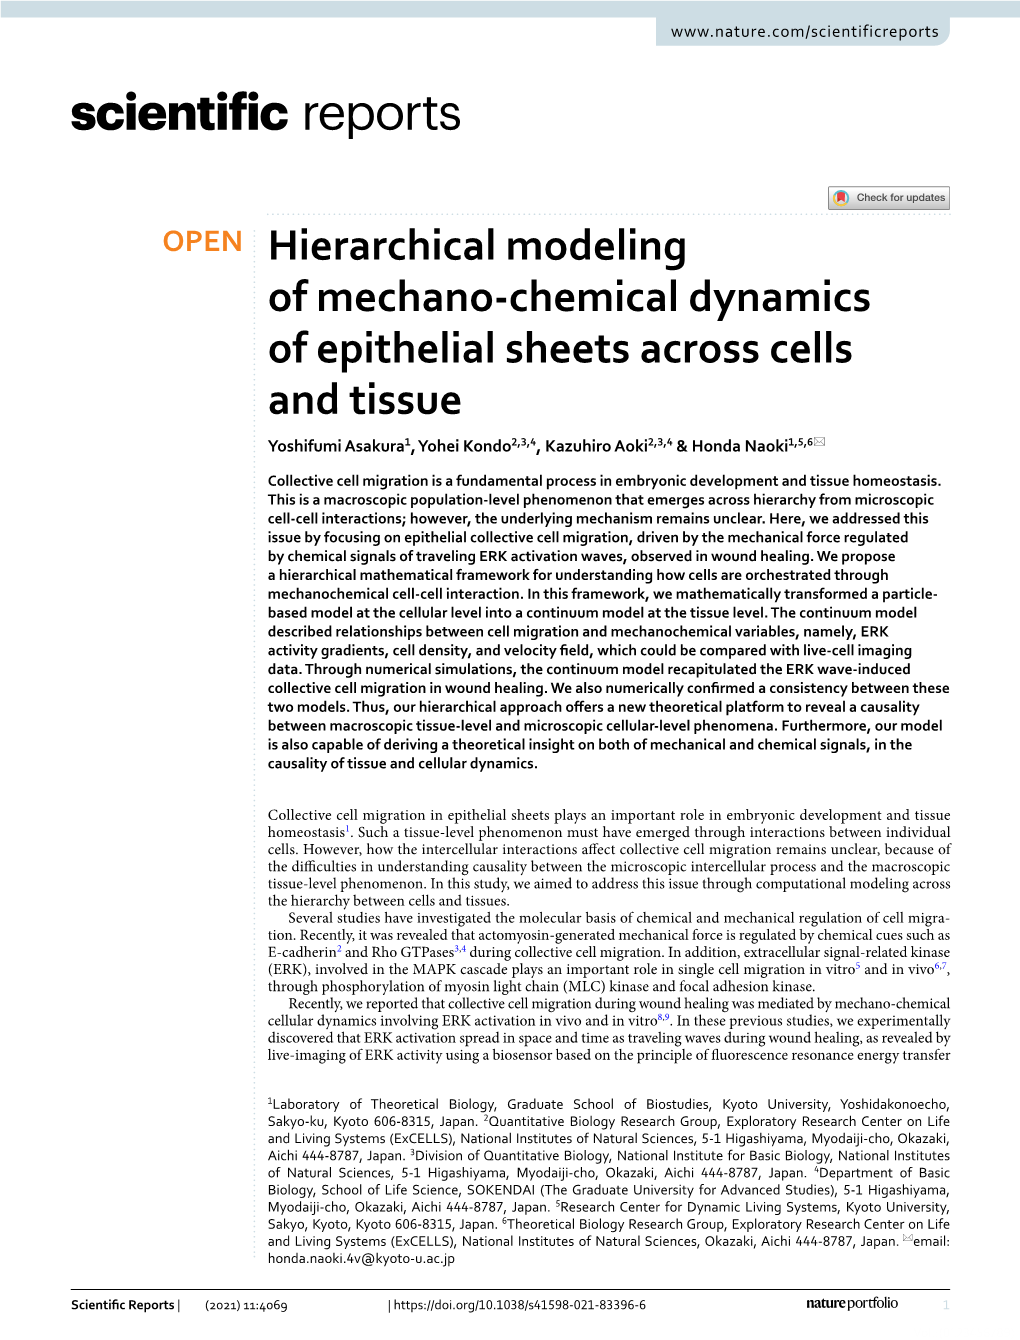 Hierarchical Modeling of Mechano-Chemical Dynamics Of